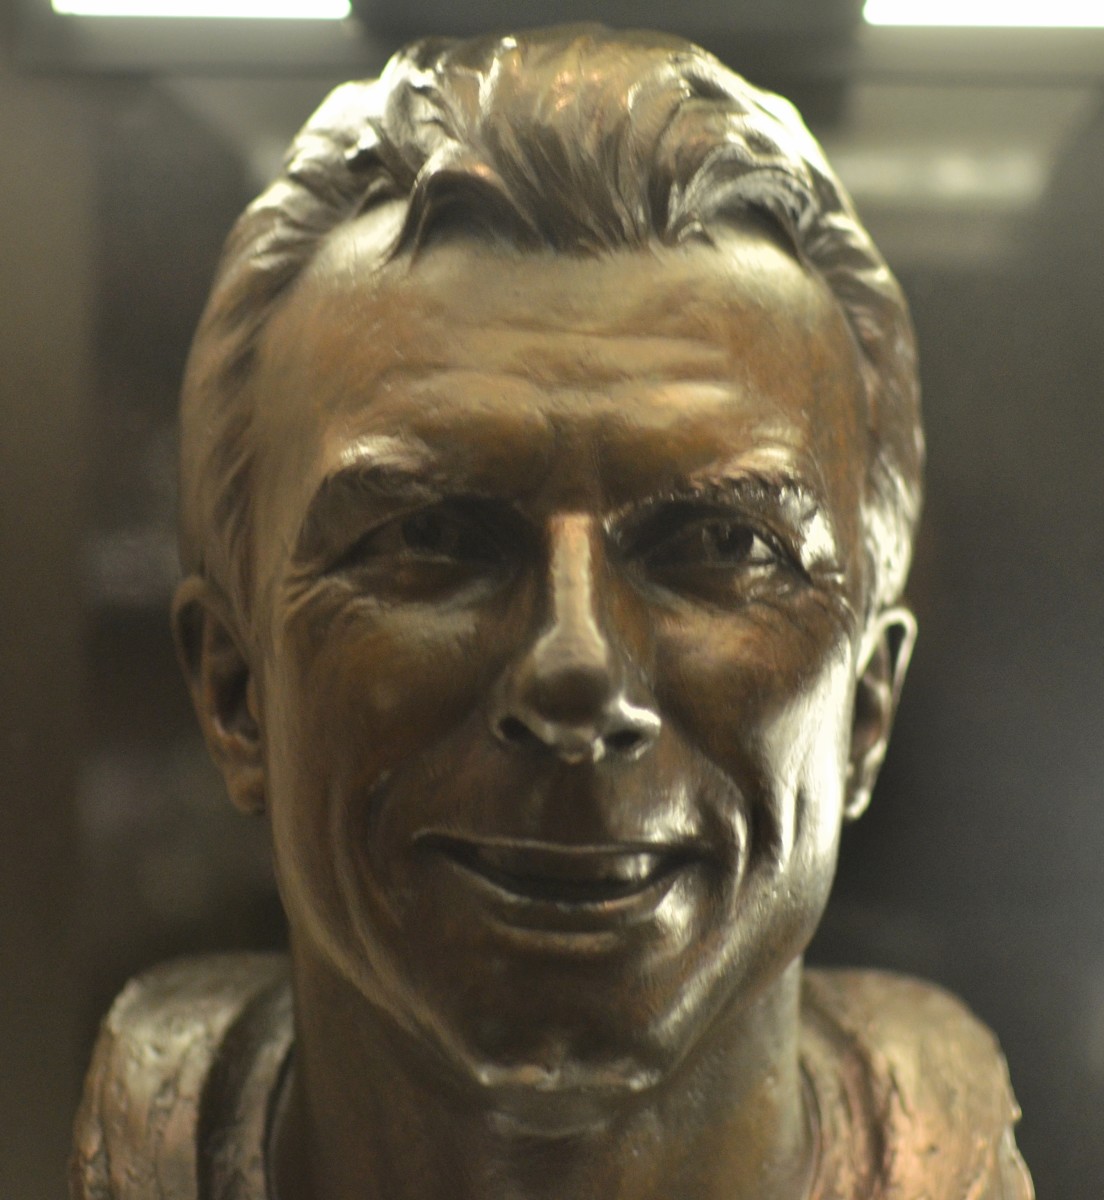 Part of the reason Joe Montana has a bust in the Pro Football Hall of Fame is because of his four Super Bowl championships.